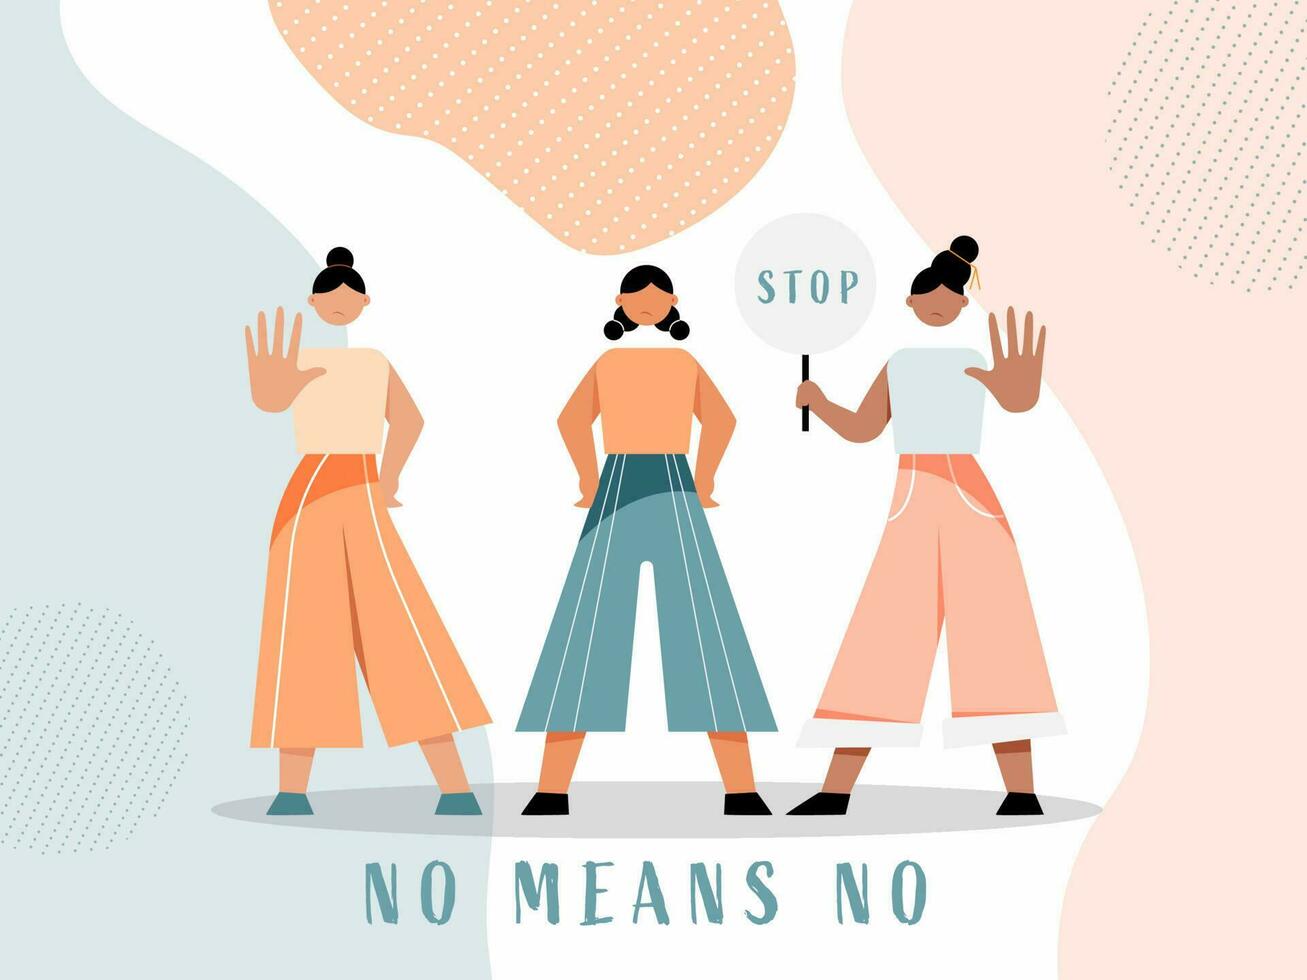 Cartoon Young Girls Protesting With Stop Symbol On Abstract Background For No Means No. vector